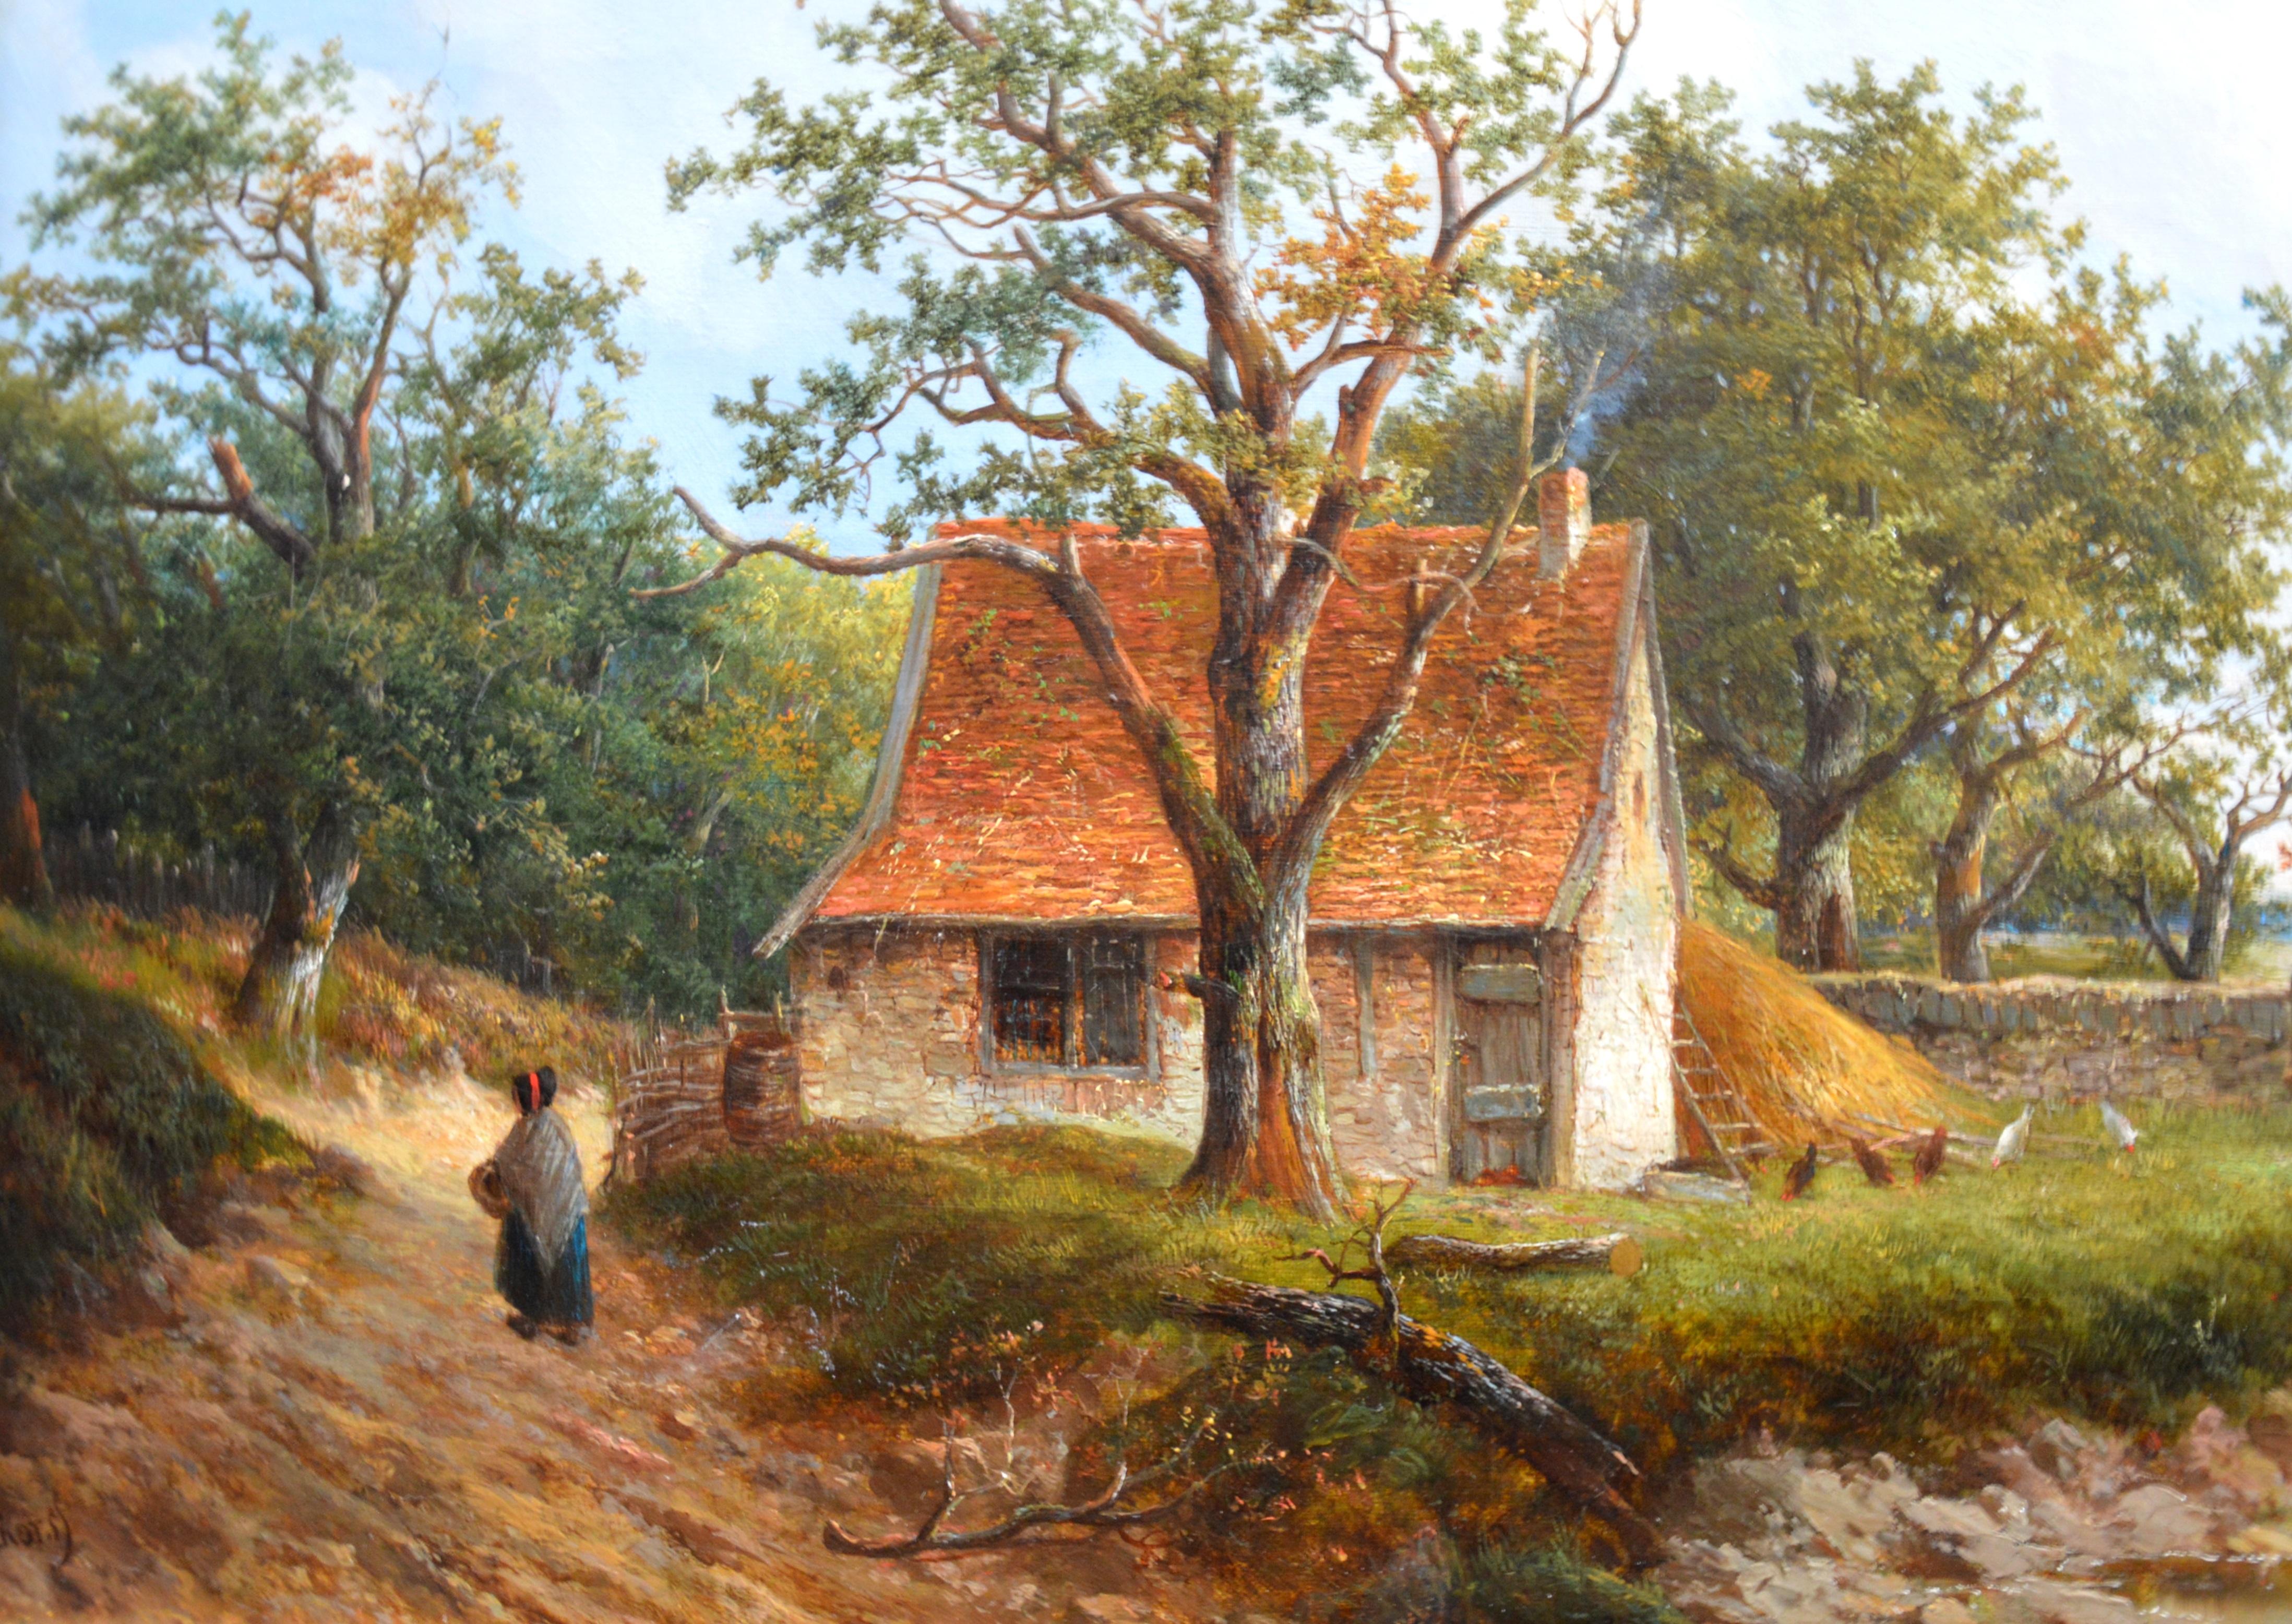 ‘Near Stratford-upon-Avon’ by Joseph Thors (1835-1920).

A fine 19th century landscape oil on canvas depicting a single figure and chickens outside a country cottage near William Shakespeare’s birthplace, Stratford-upon-Avon. The painting is signed